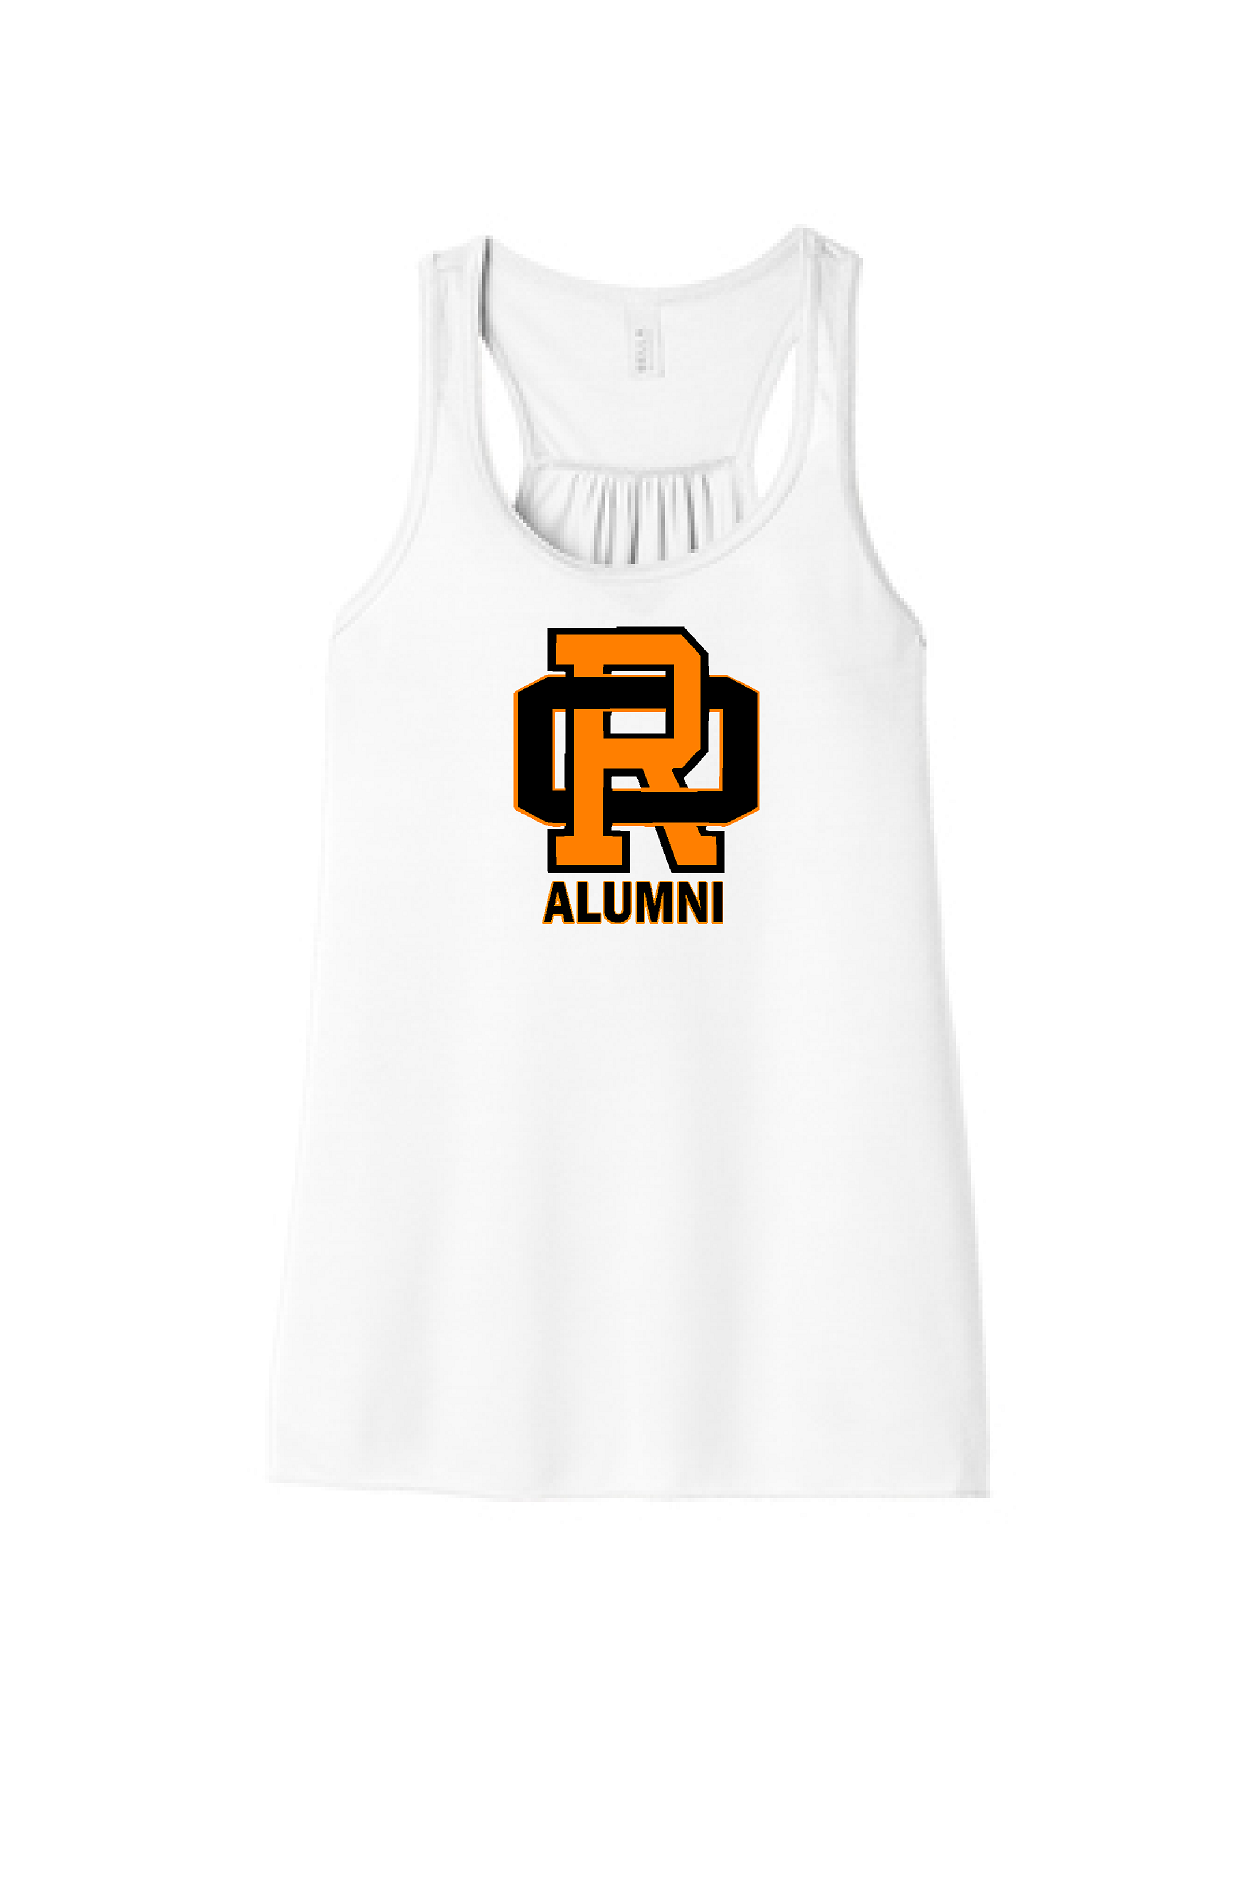 ROA Ladies Tank - Color Variations Available